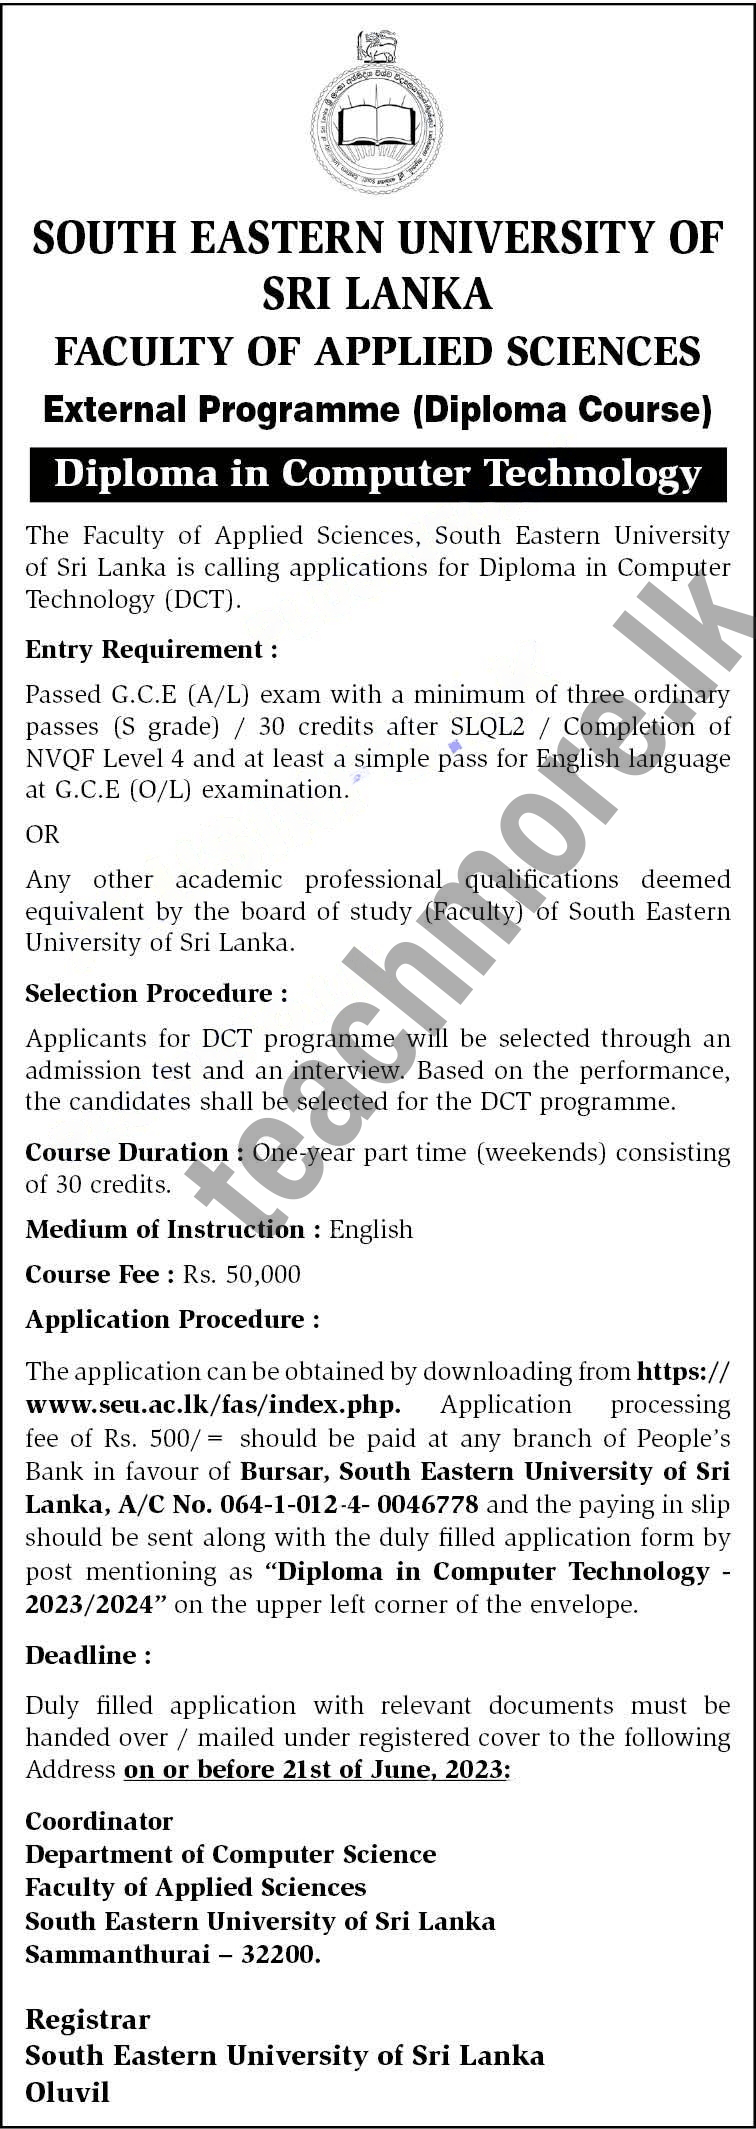 Diploma in Computer Technology (DCT) Course 2023/2024 - South Eastern University of Sri Lanka